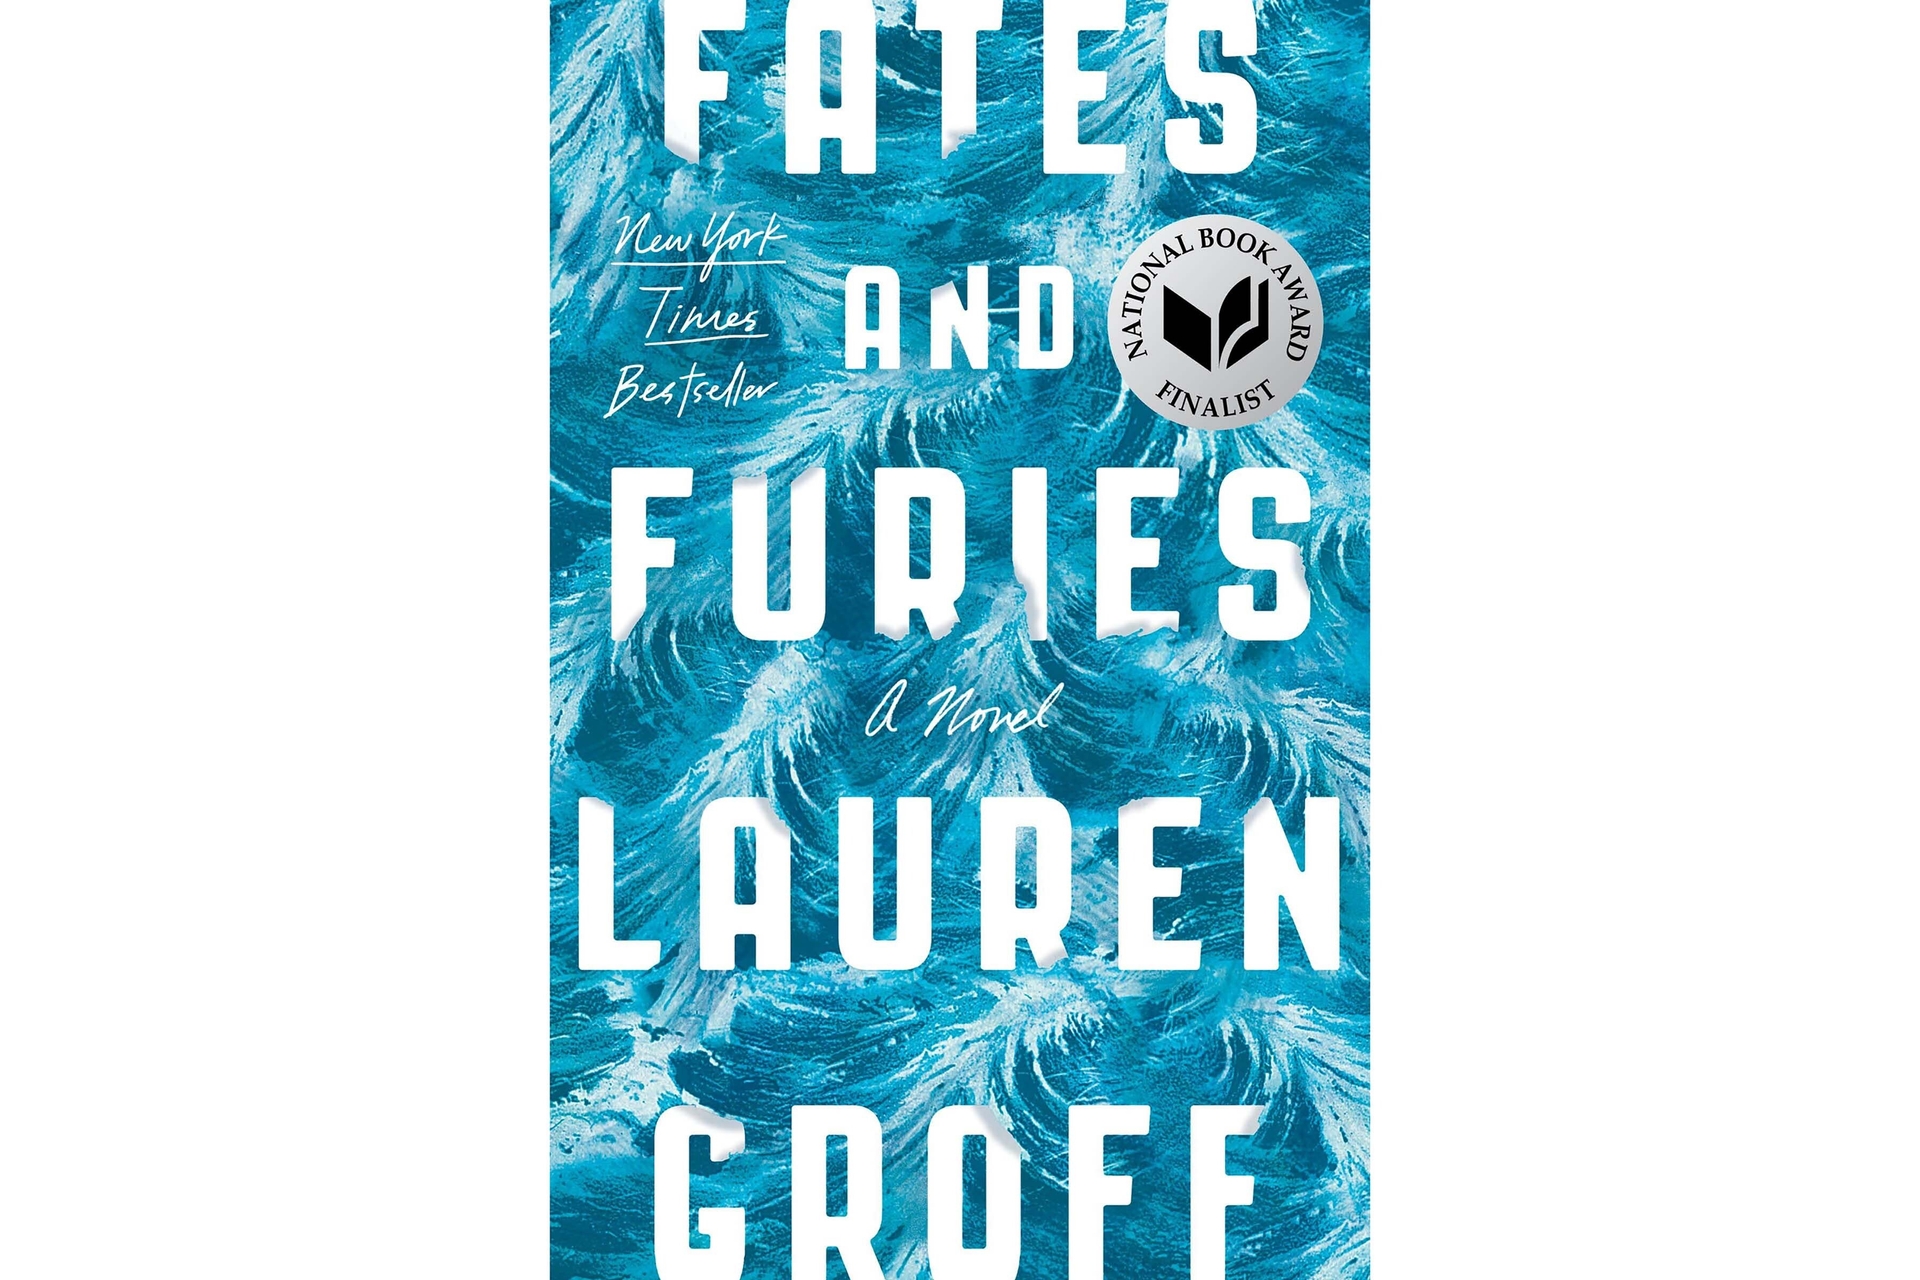 Book cover for Fates and Furies by Lauren Groff, the font is all-caps and white, set in front of a handpainted background that looks like waves in an ocean.